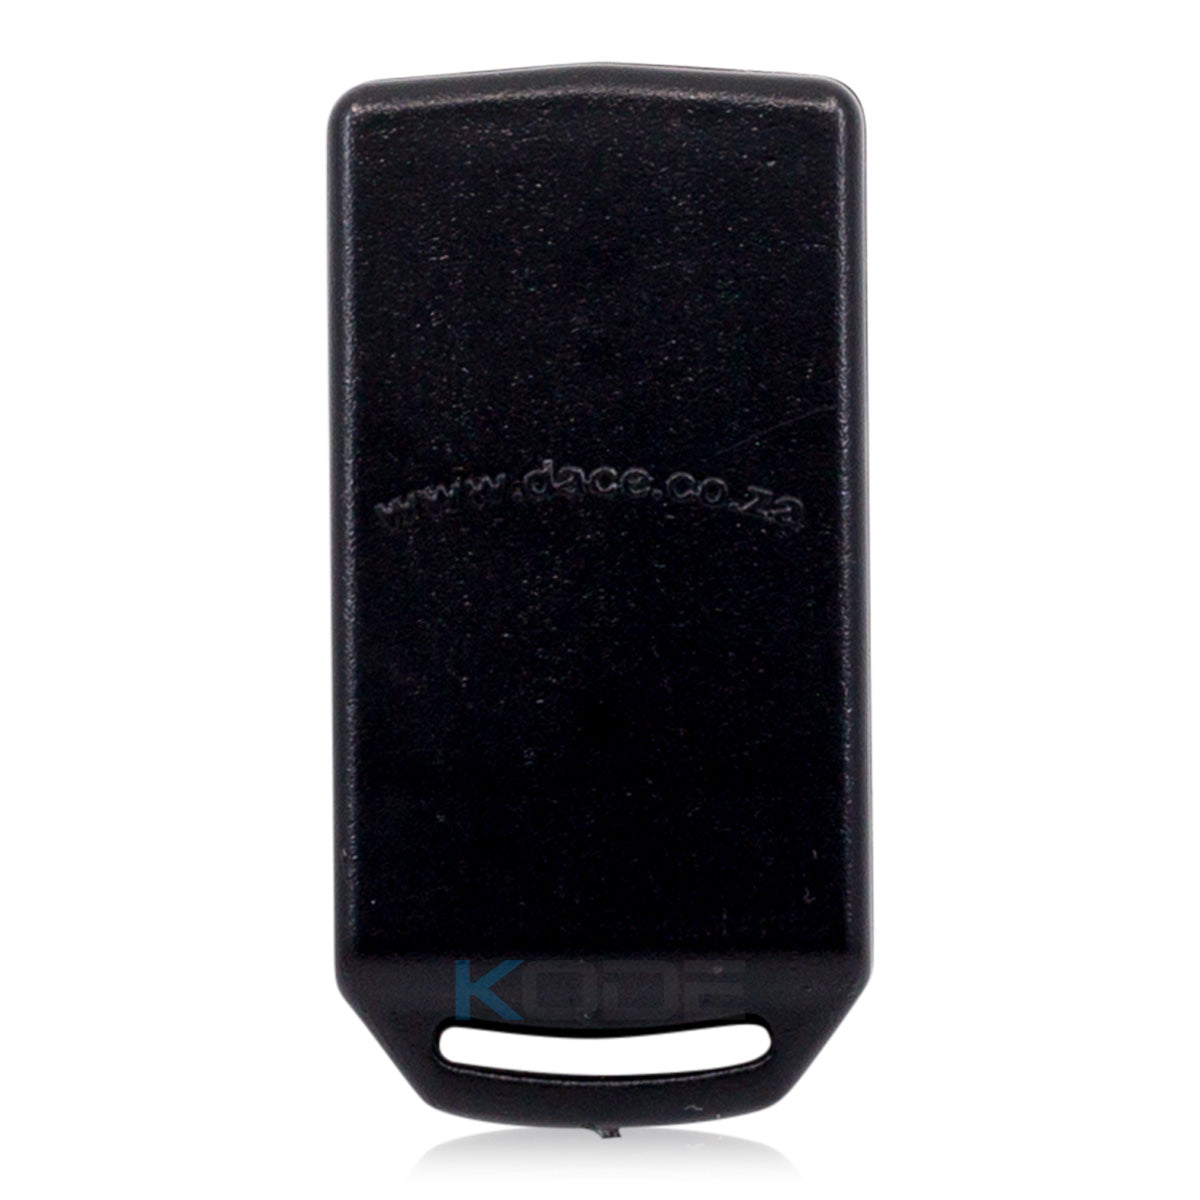 DACE TM4 Duratronic Remote - Back